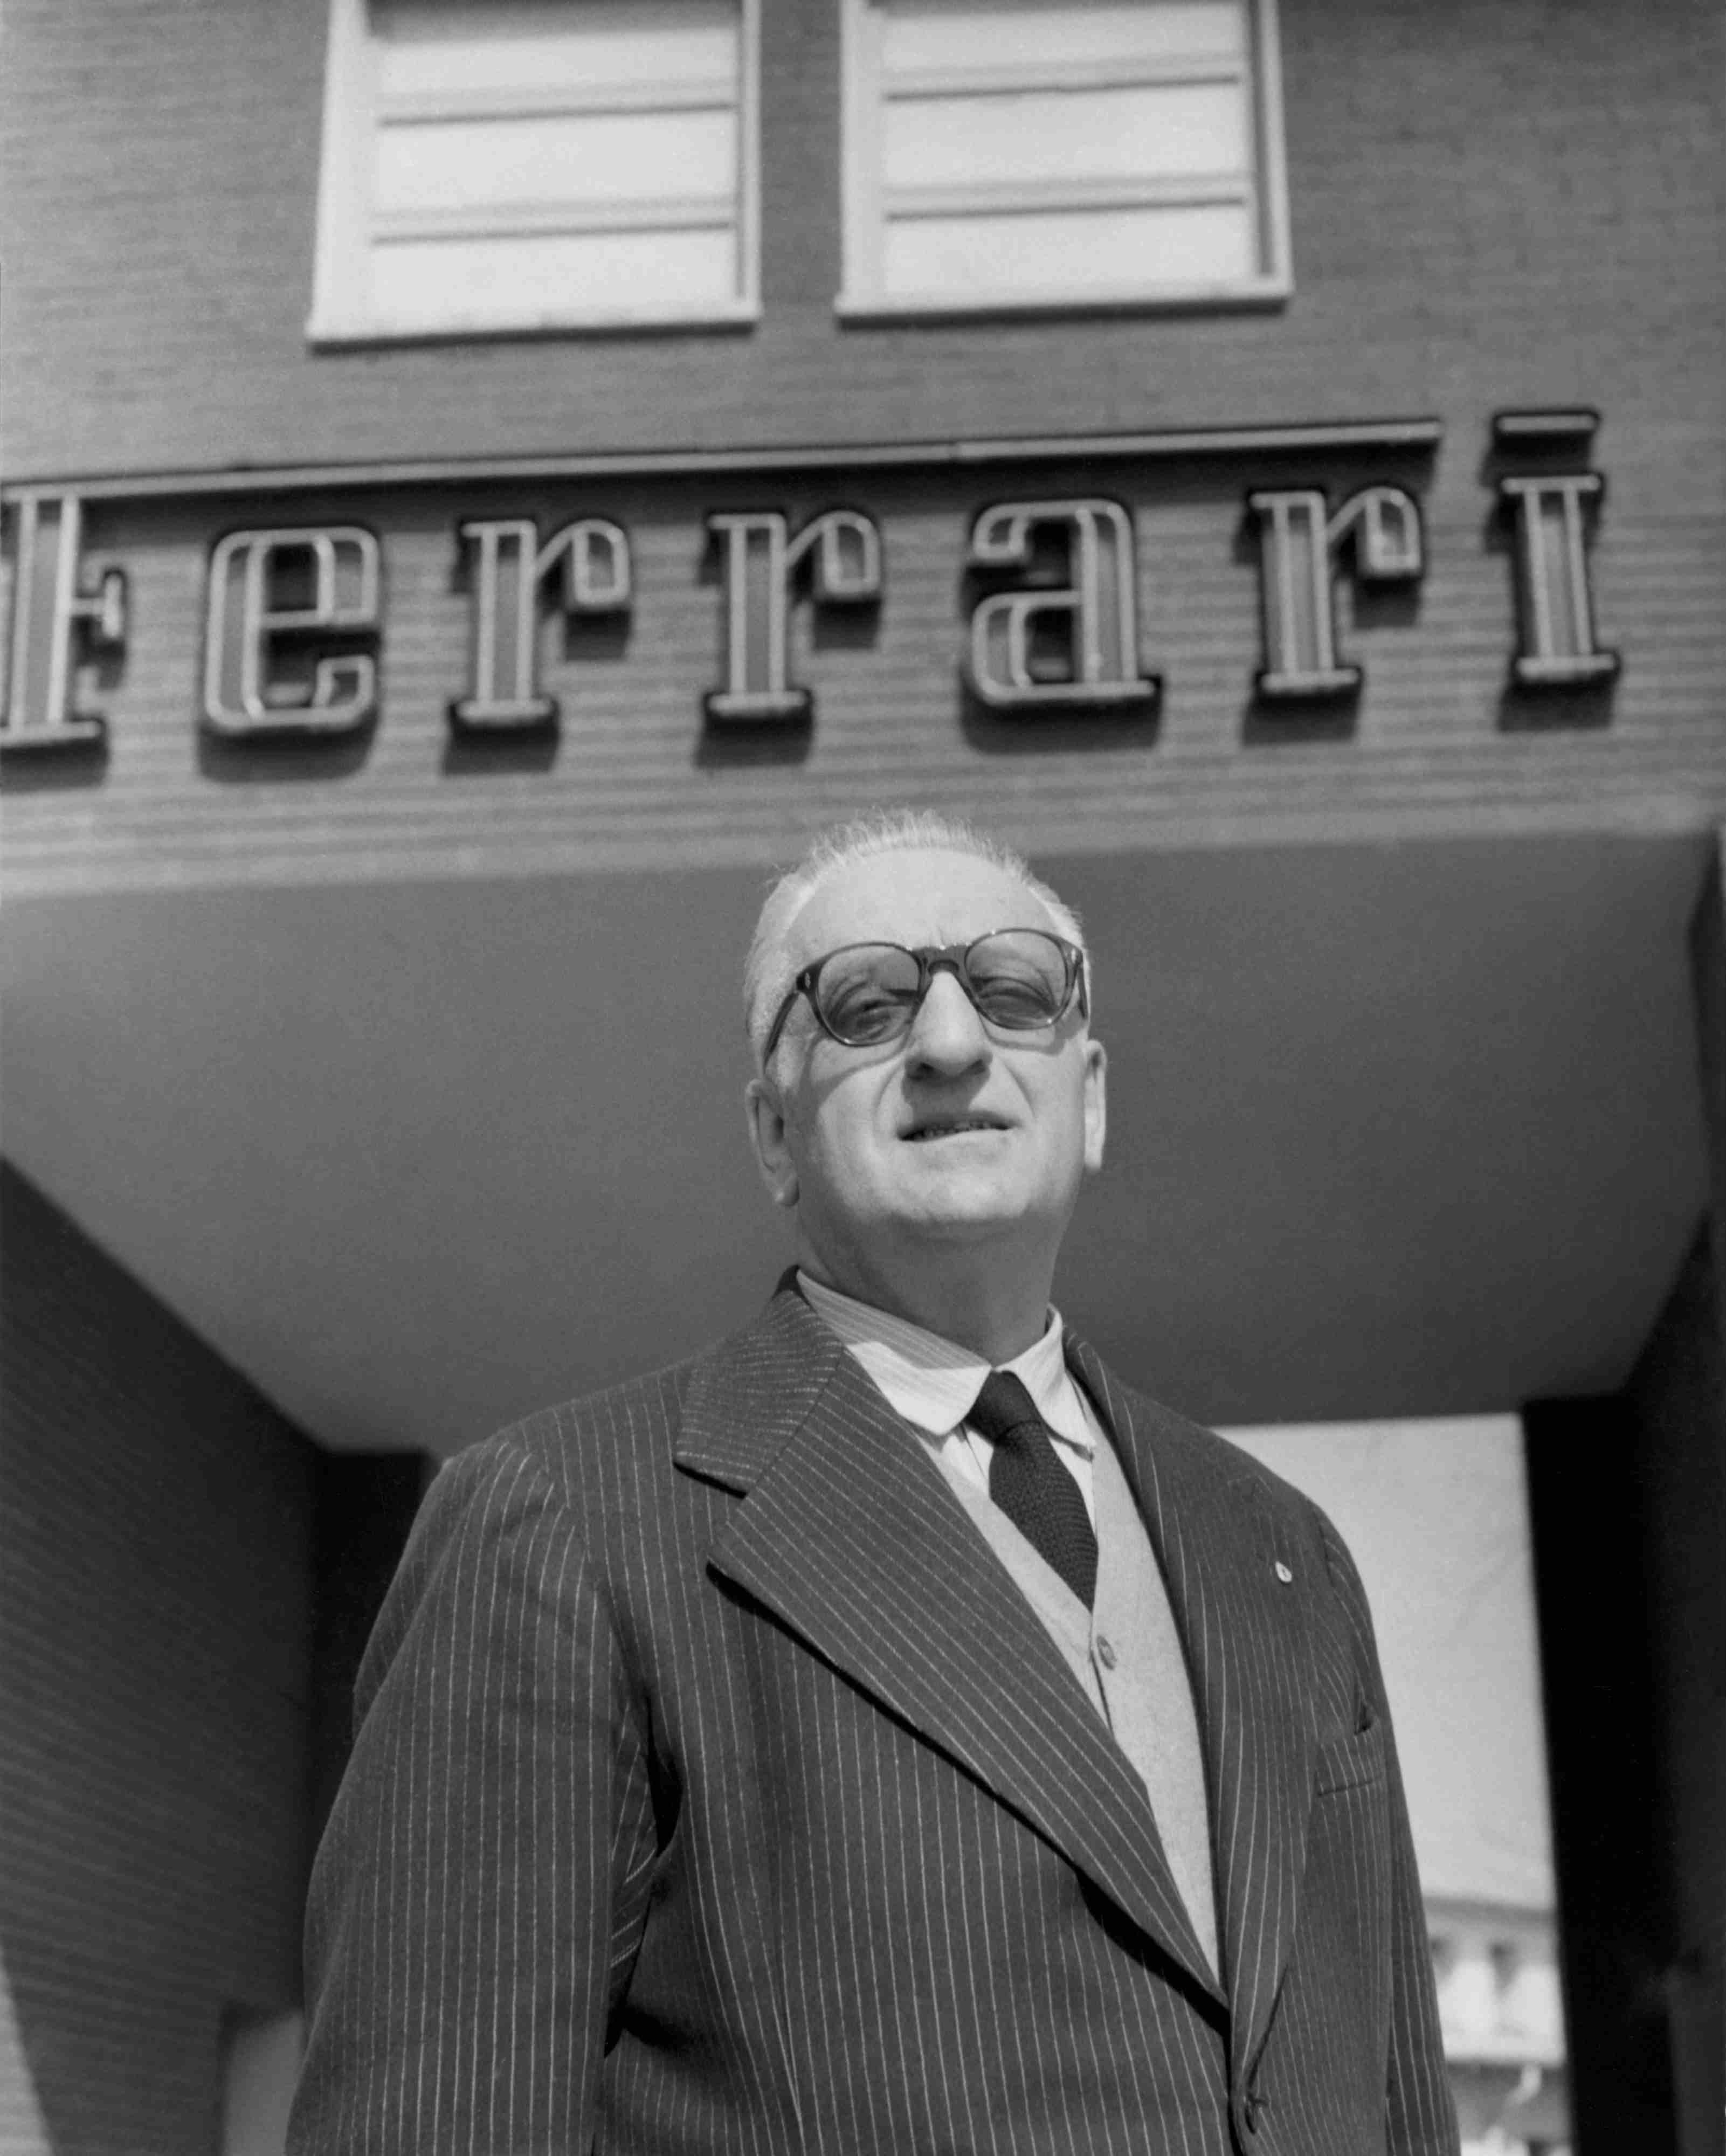 Which car did Enzo Ferrari name in memory of his son, Alfredo?